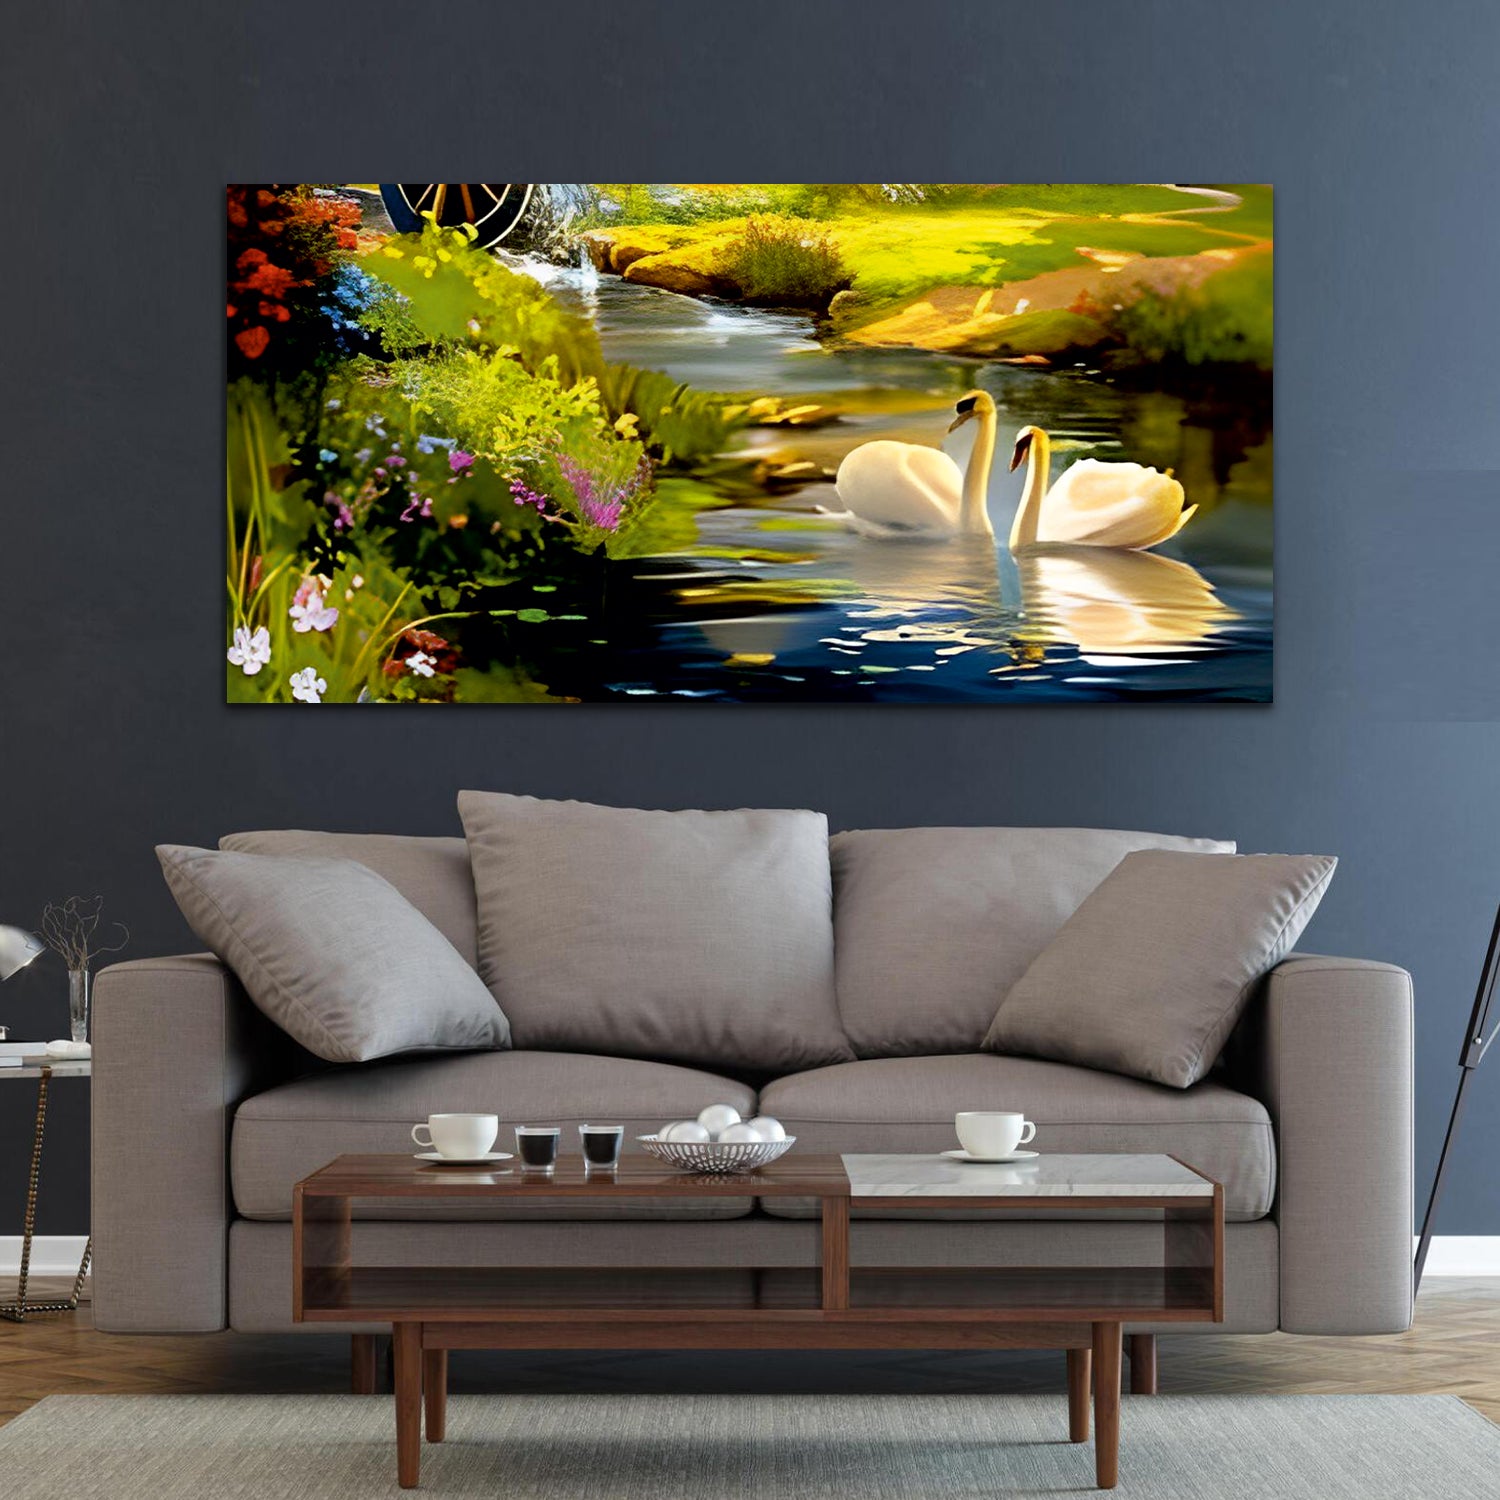 Swans Love river Bed room living room Canvas Wall Painting